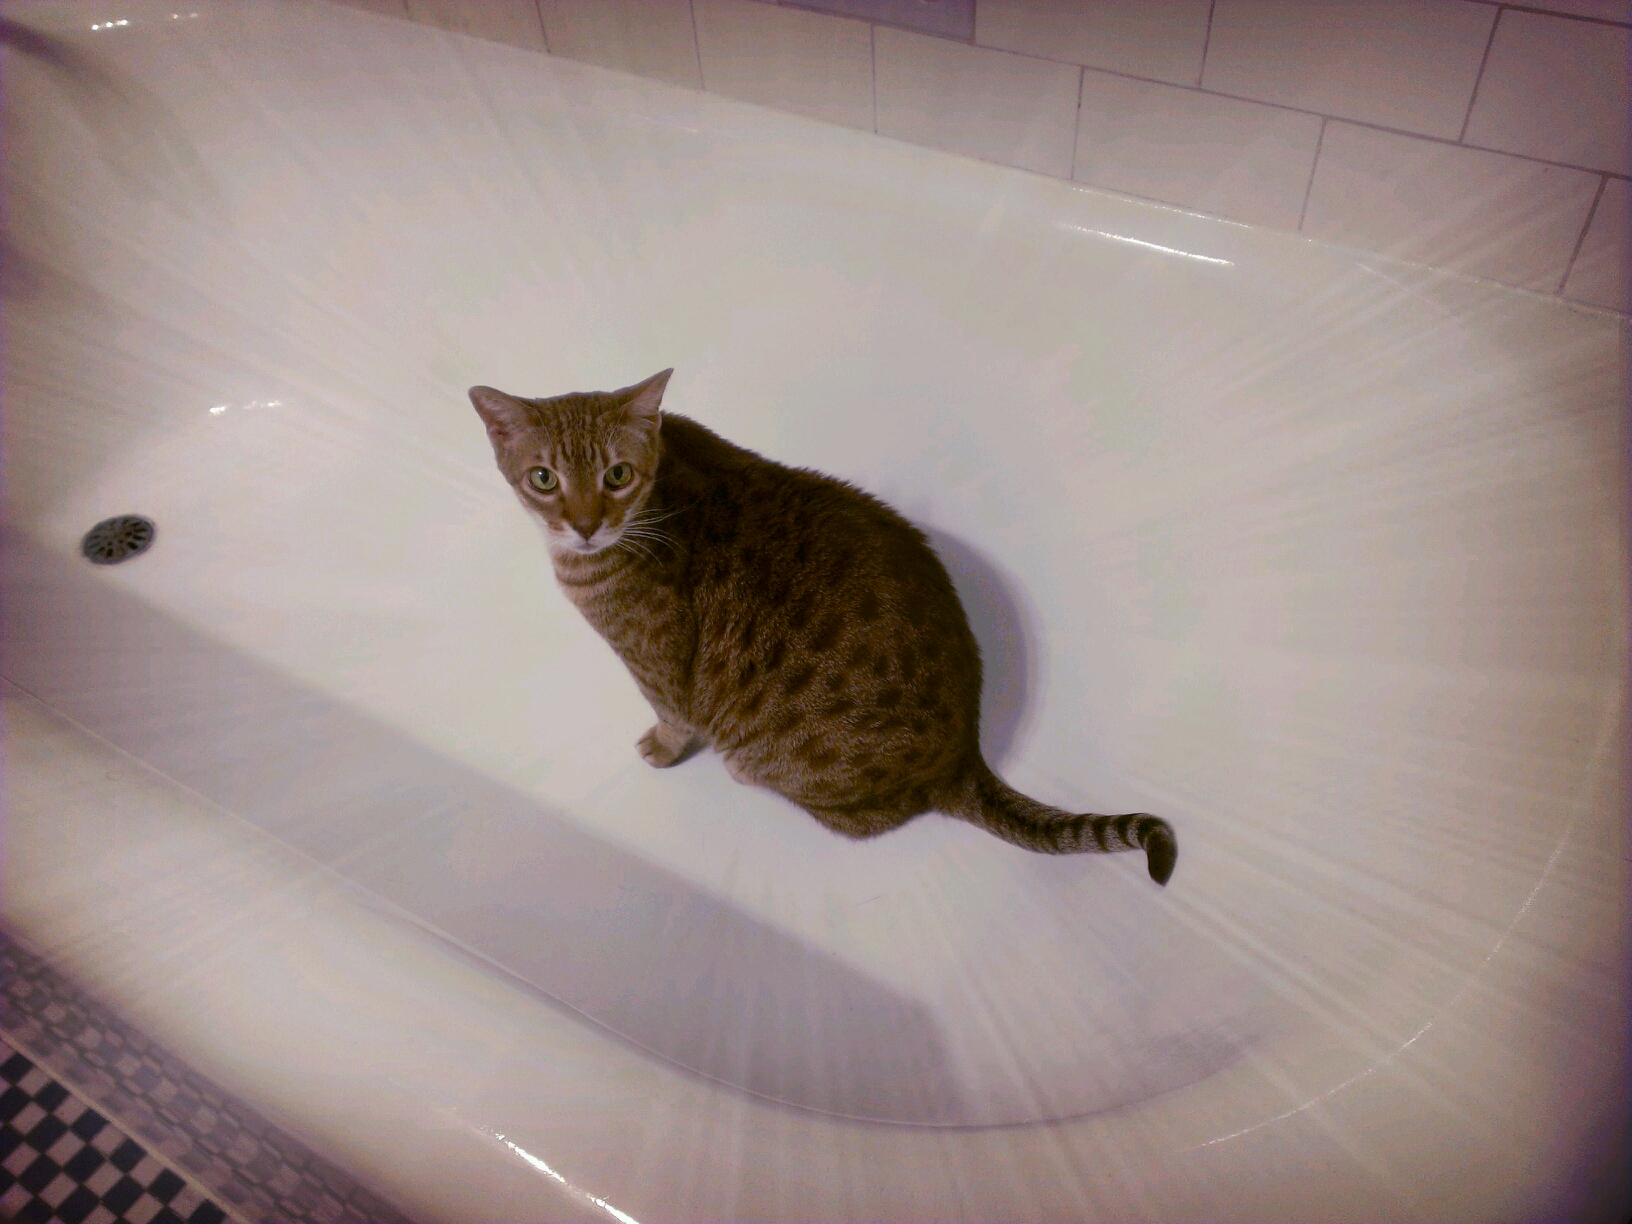 there is a cat sitting inside a bathtub